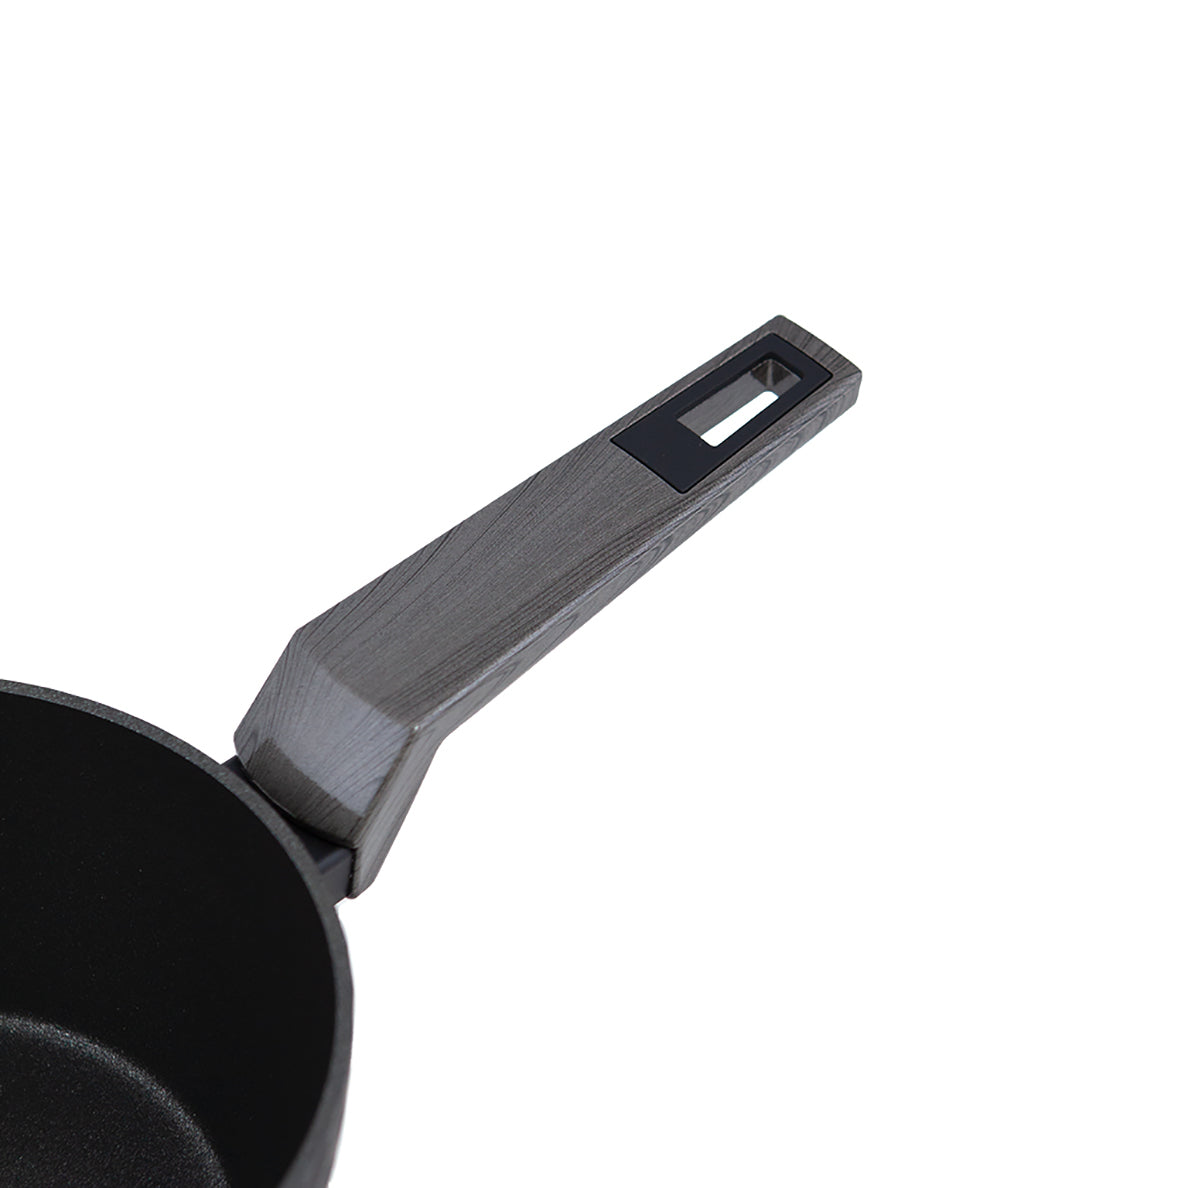 Black Ice saucepan with diamond finish lid. For all types of cookers, including induction